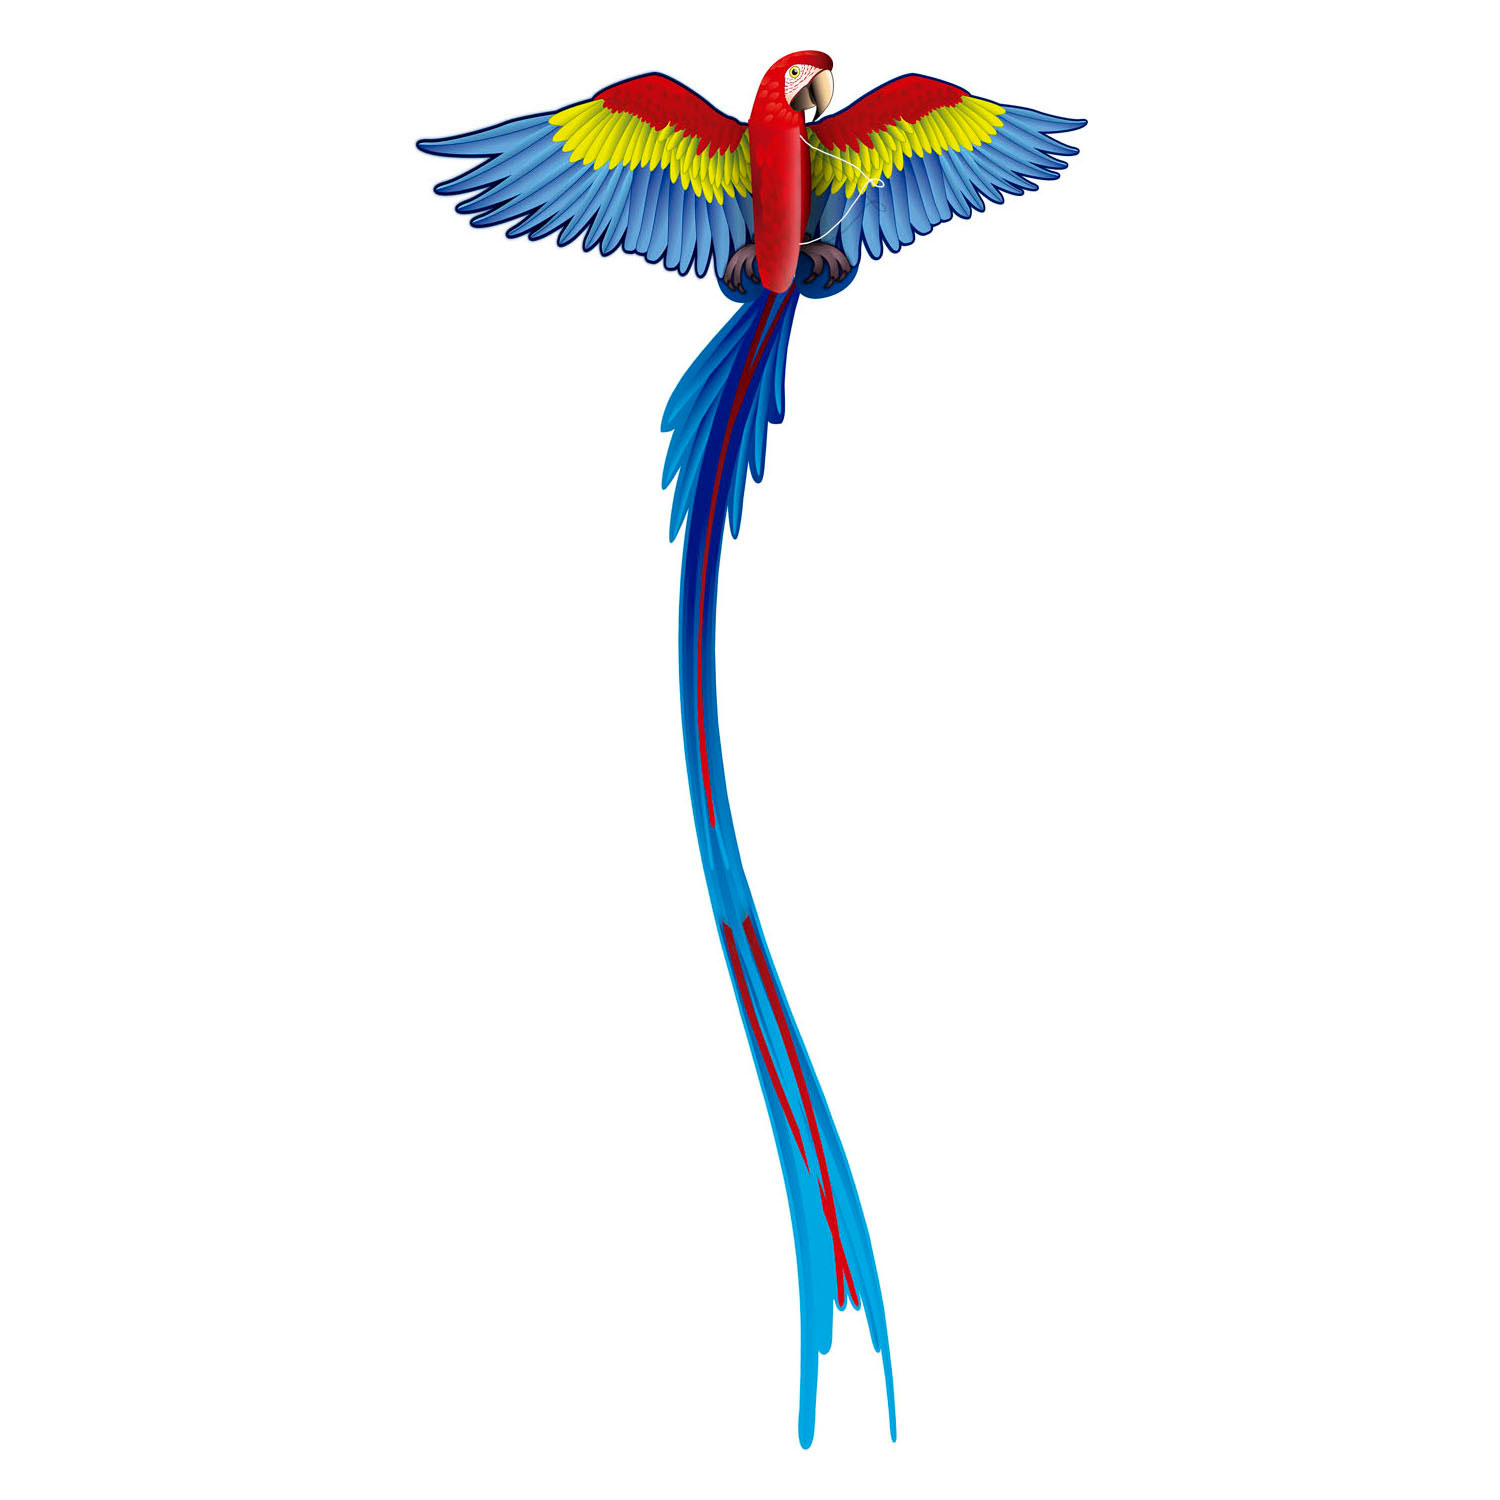 Kites Ready 2 Fly - Cerf-volant pop-up 3D Parrot